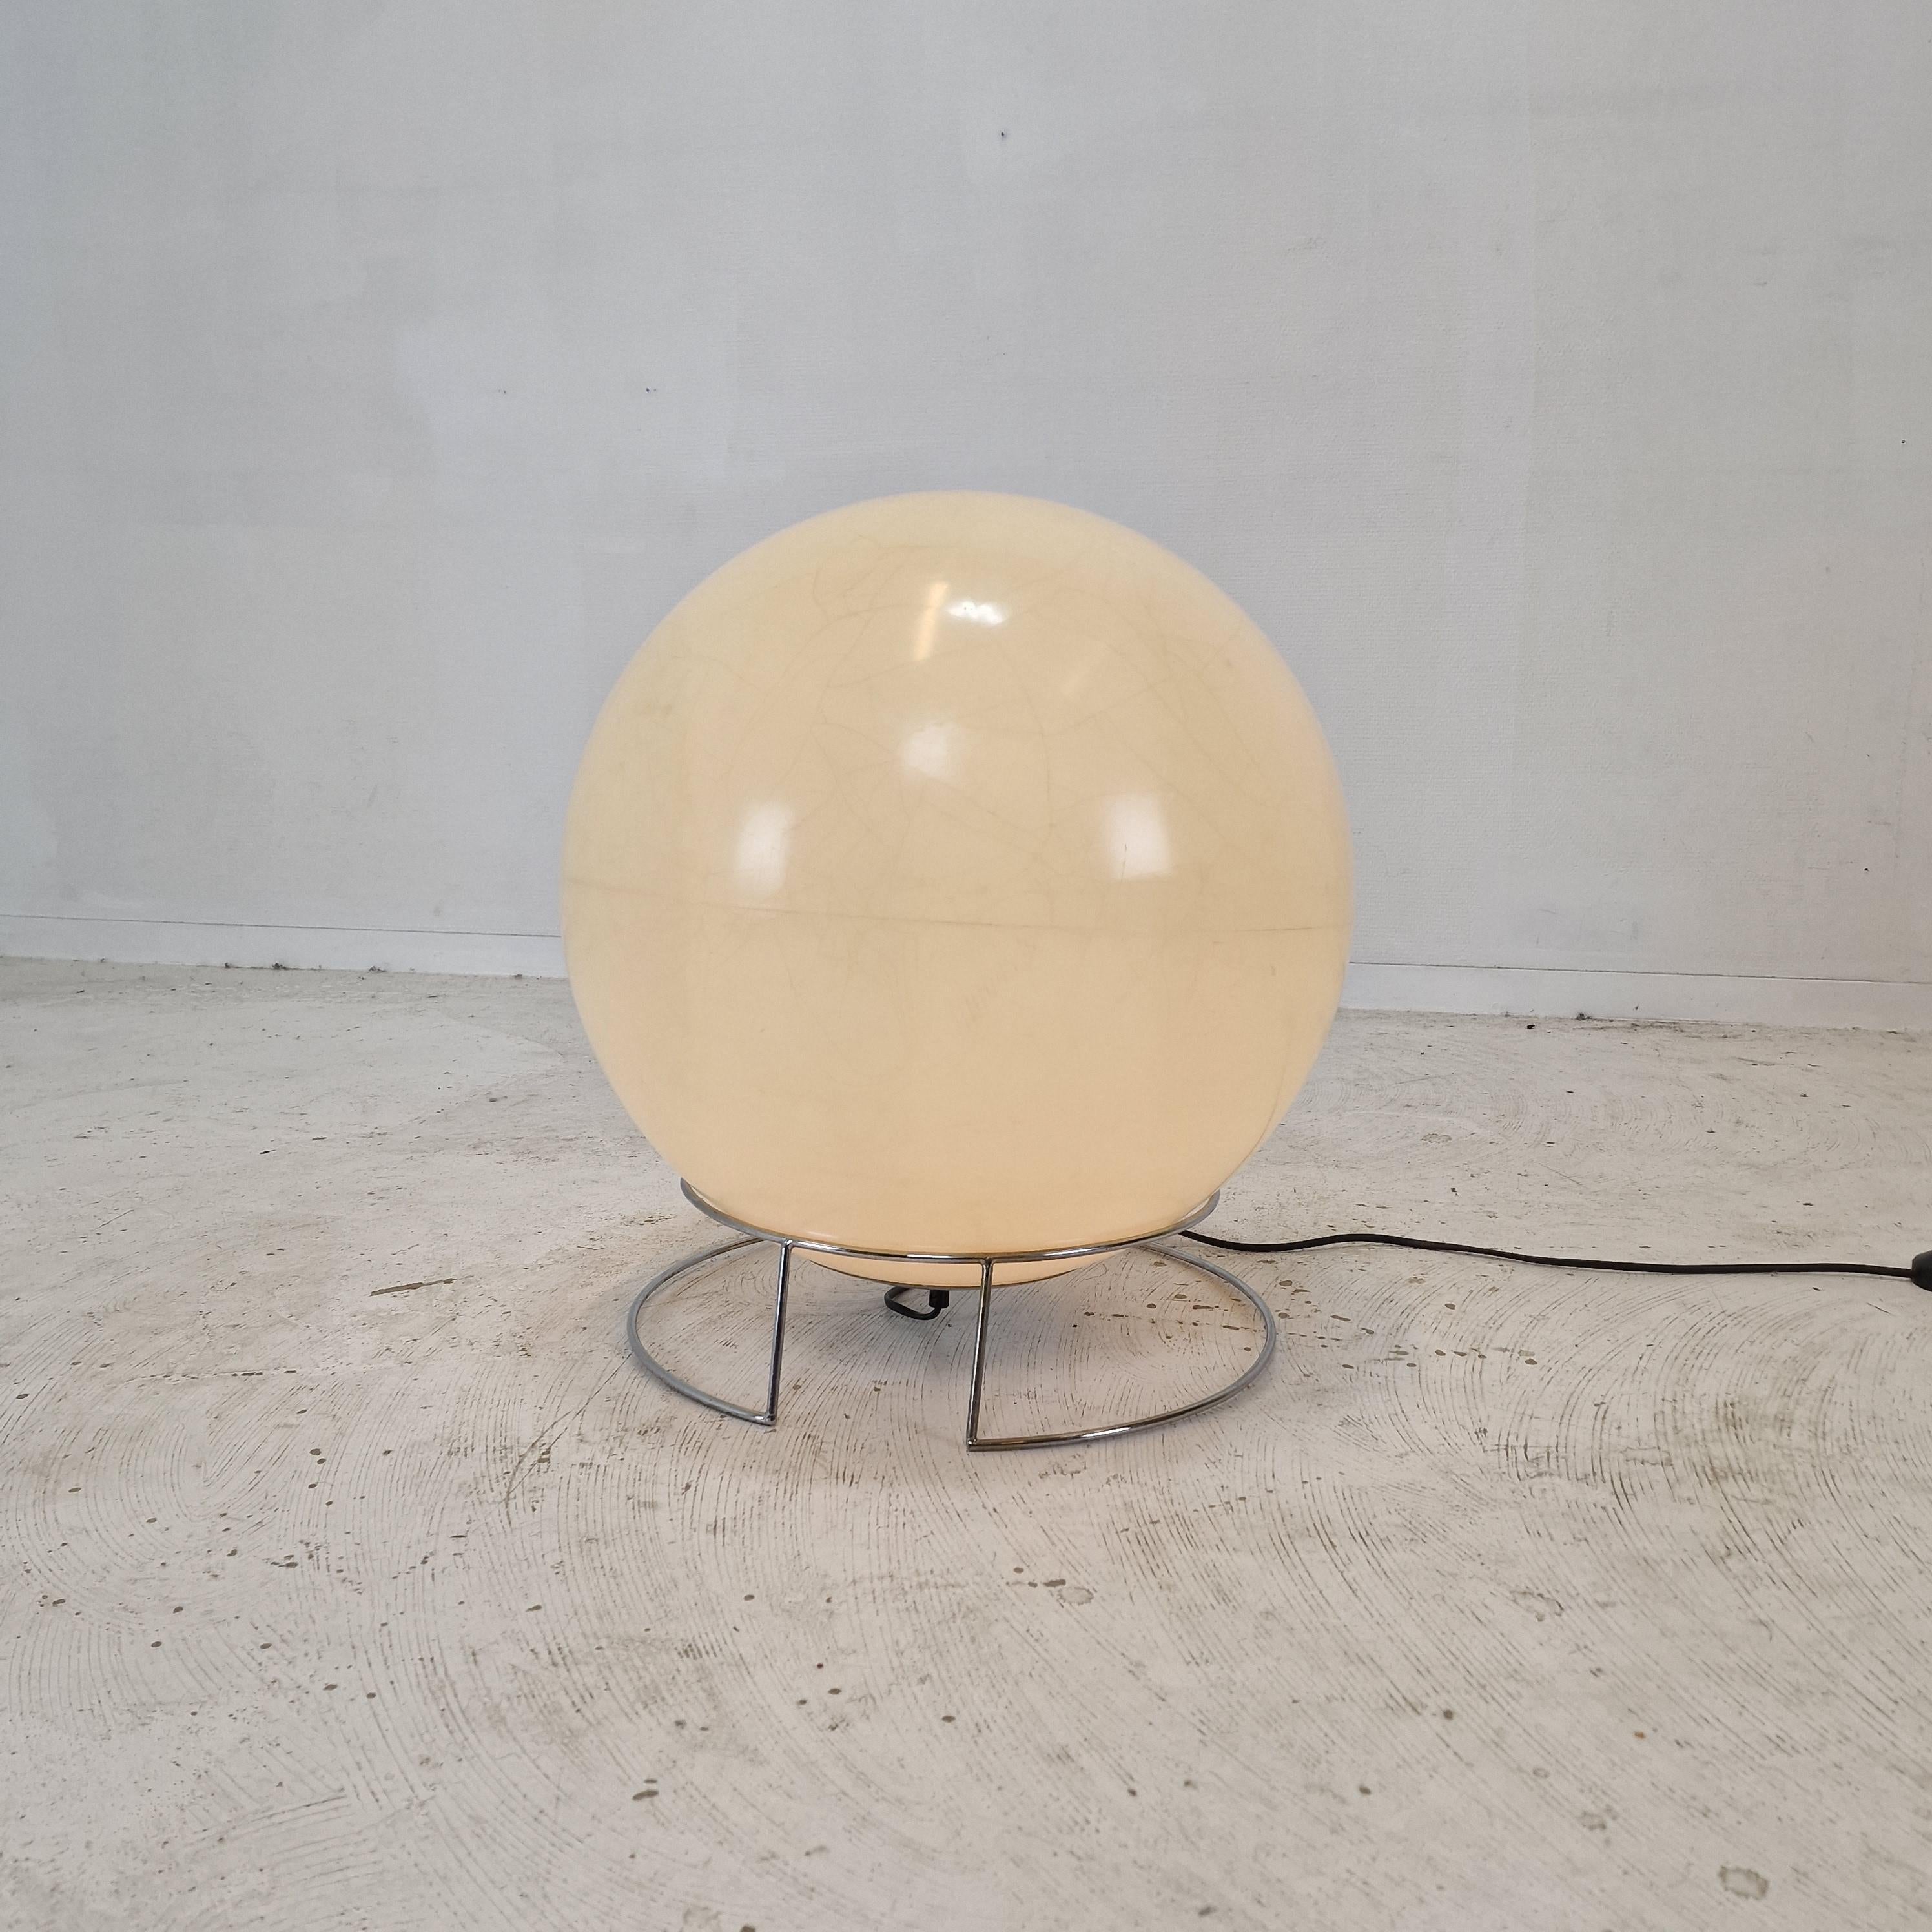 An eye-catching table or floor lamp, model “Saturnus”.
It is manufactured by Raak in the Netherlands in 1971.  

This rare piece was produced only in that year, and is therefore really hard to find! 

It’s is a beautiful piece, made of a large